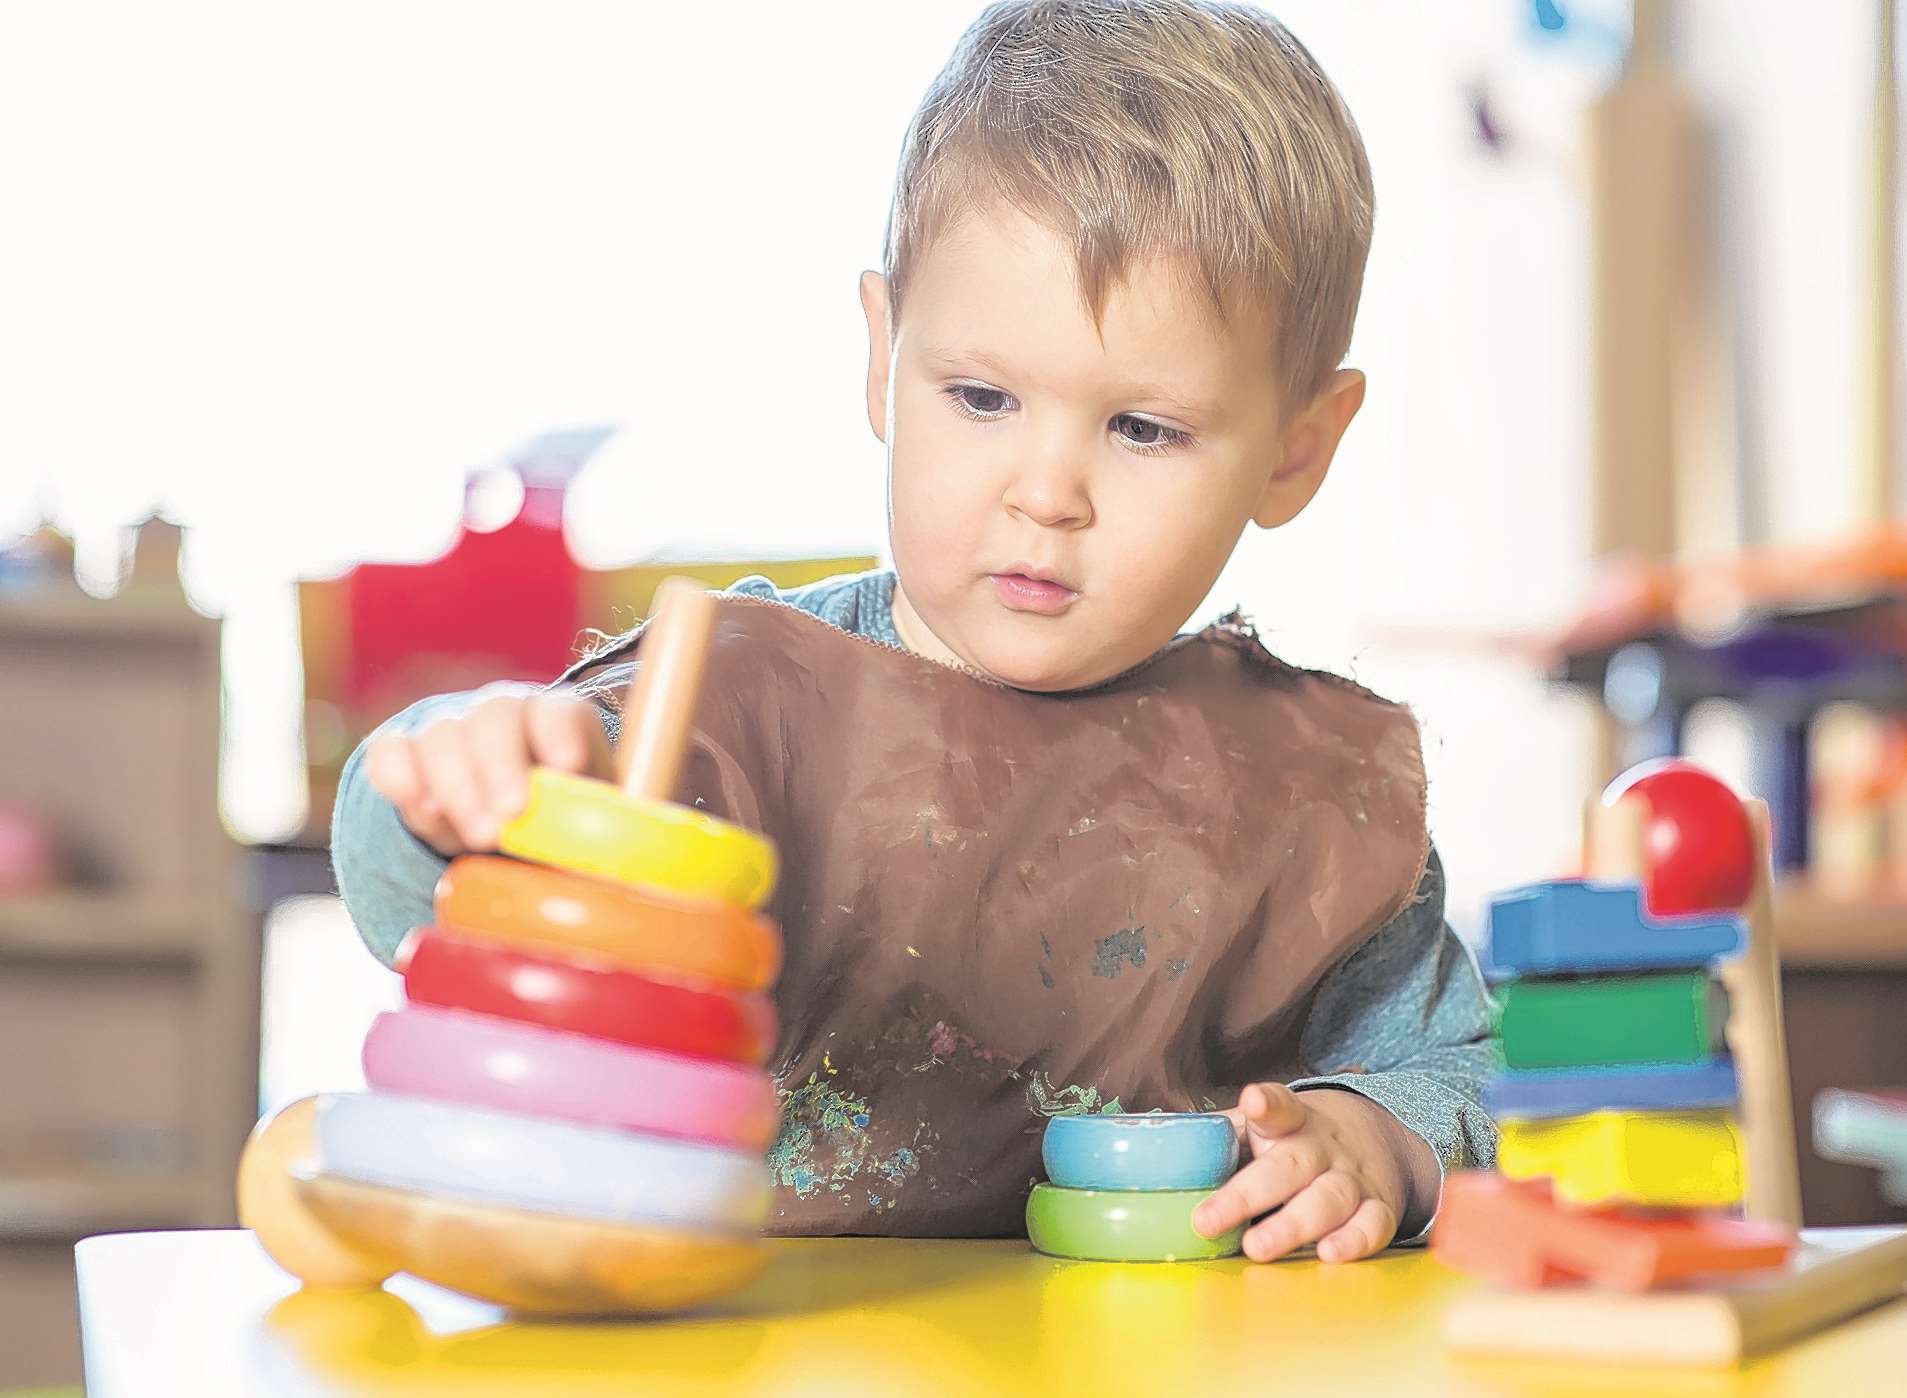 Parents are advised to consider the nursery’s ethos, setting and space available